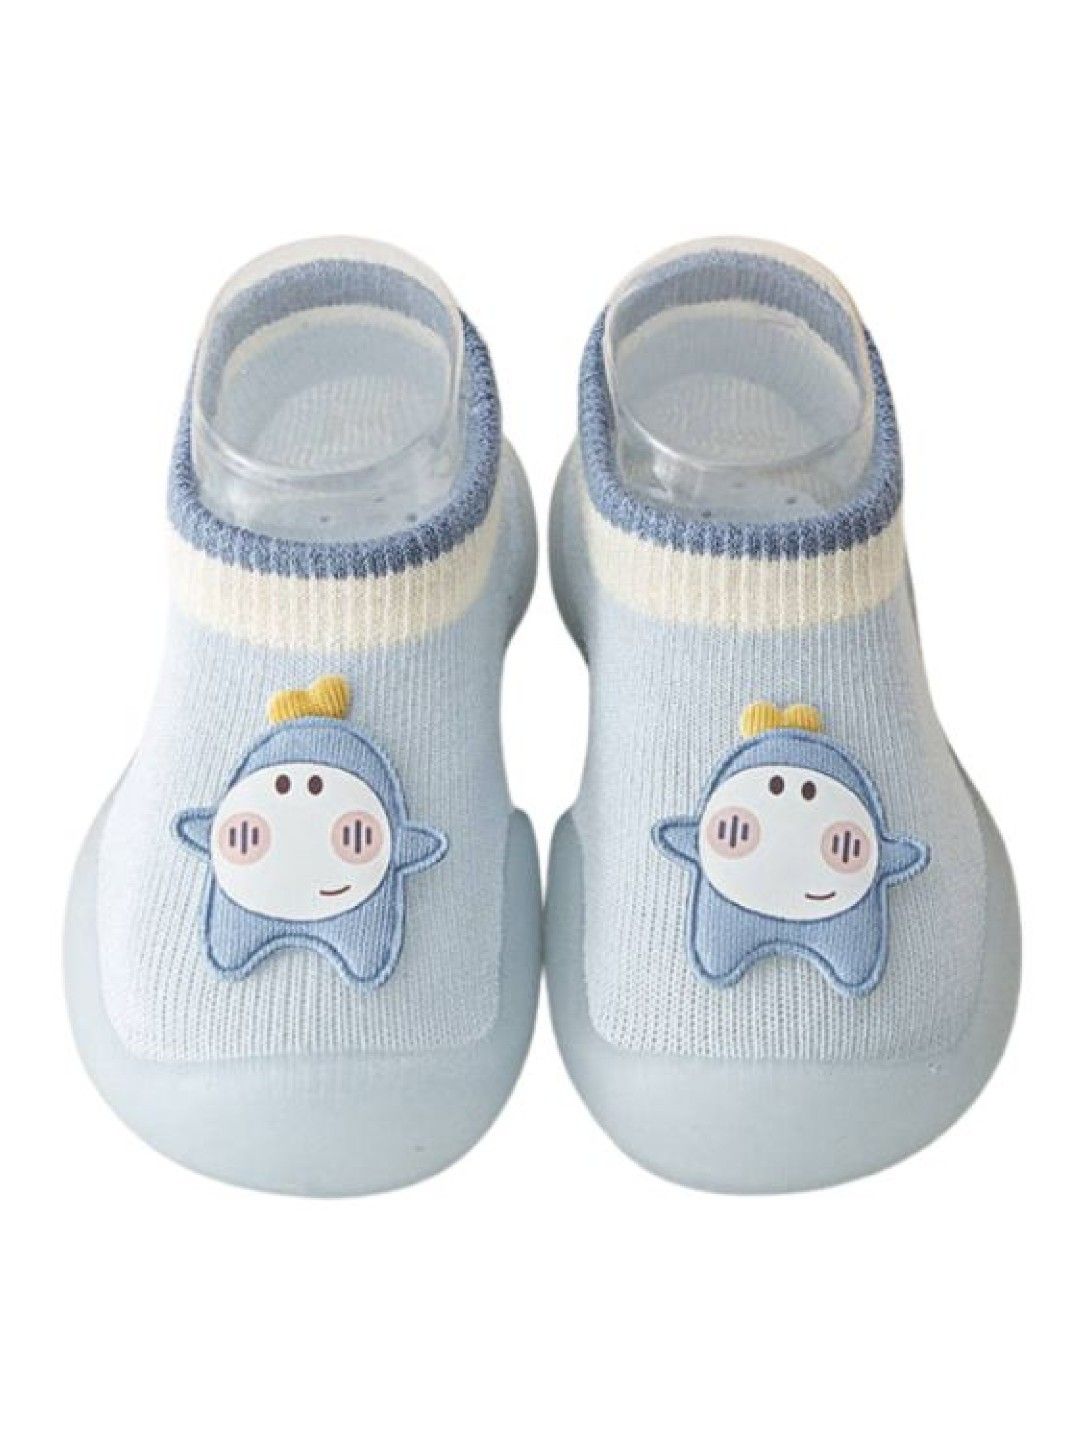 BabyStudioPH Baby Low Cut Non-Skid Shoes